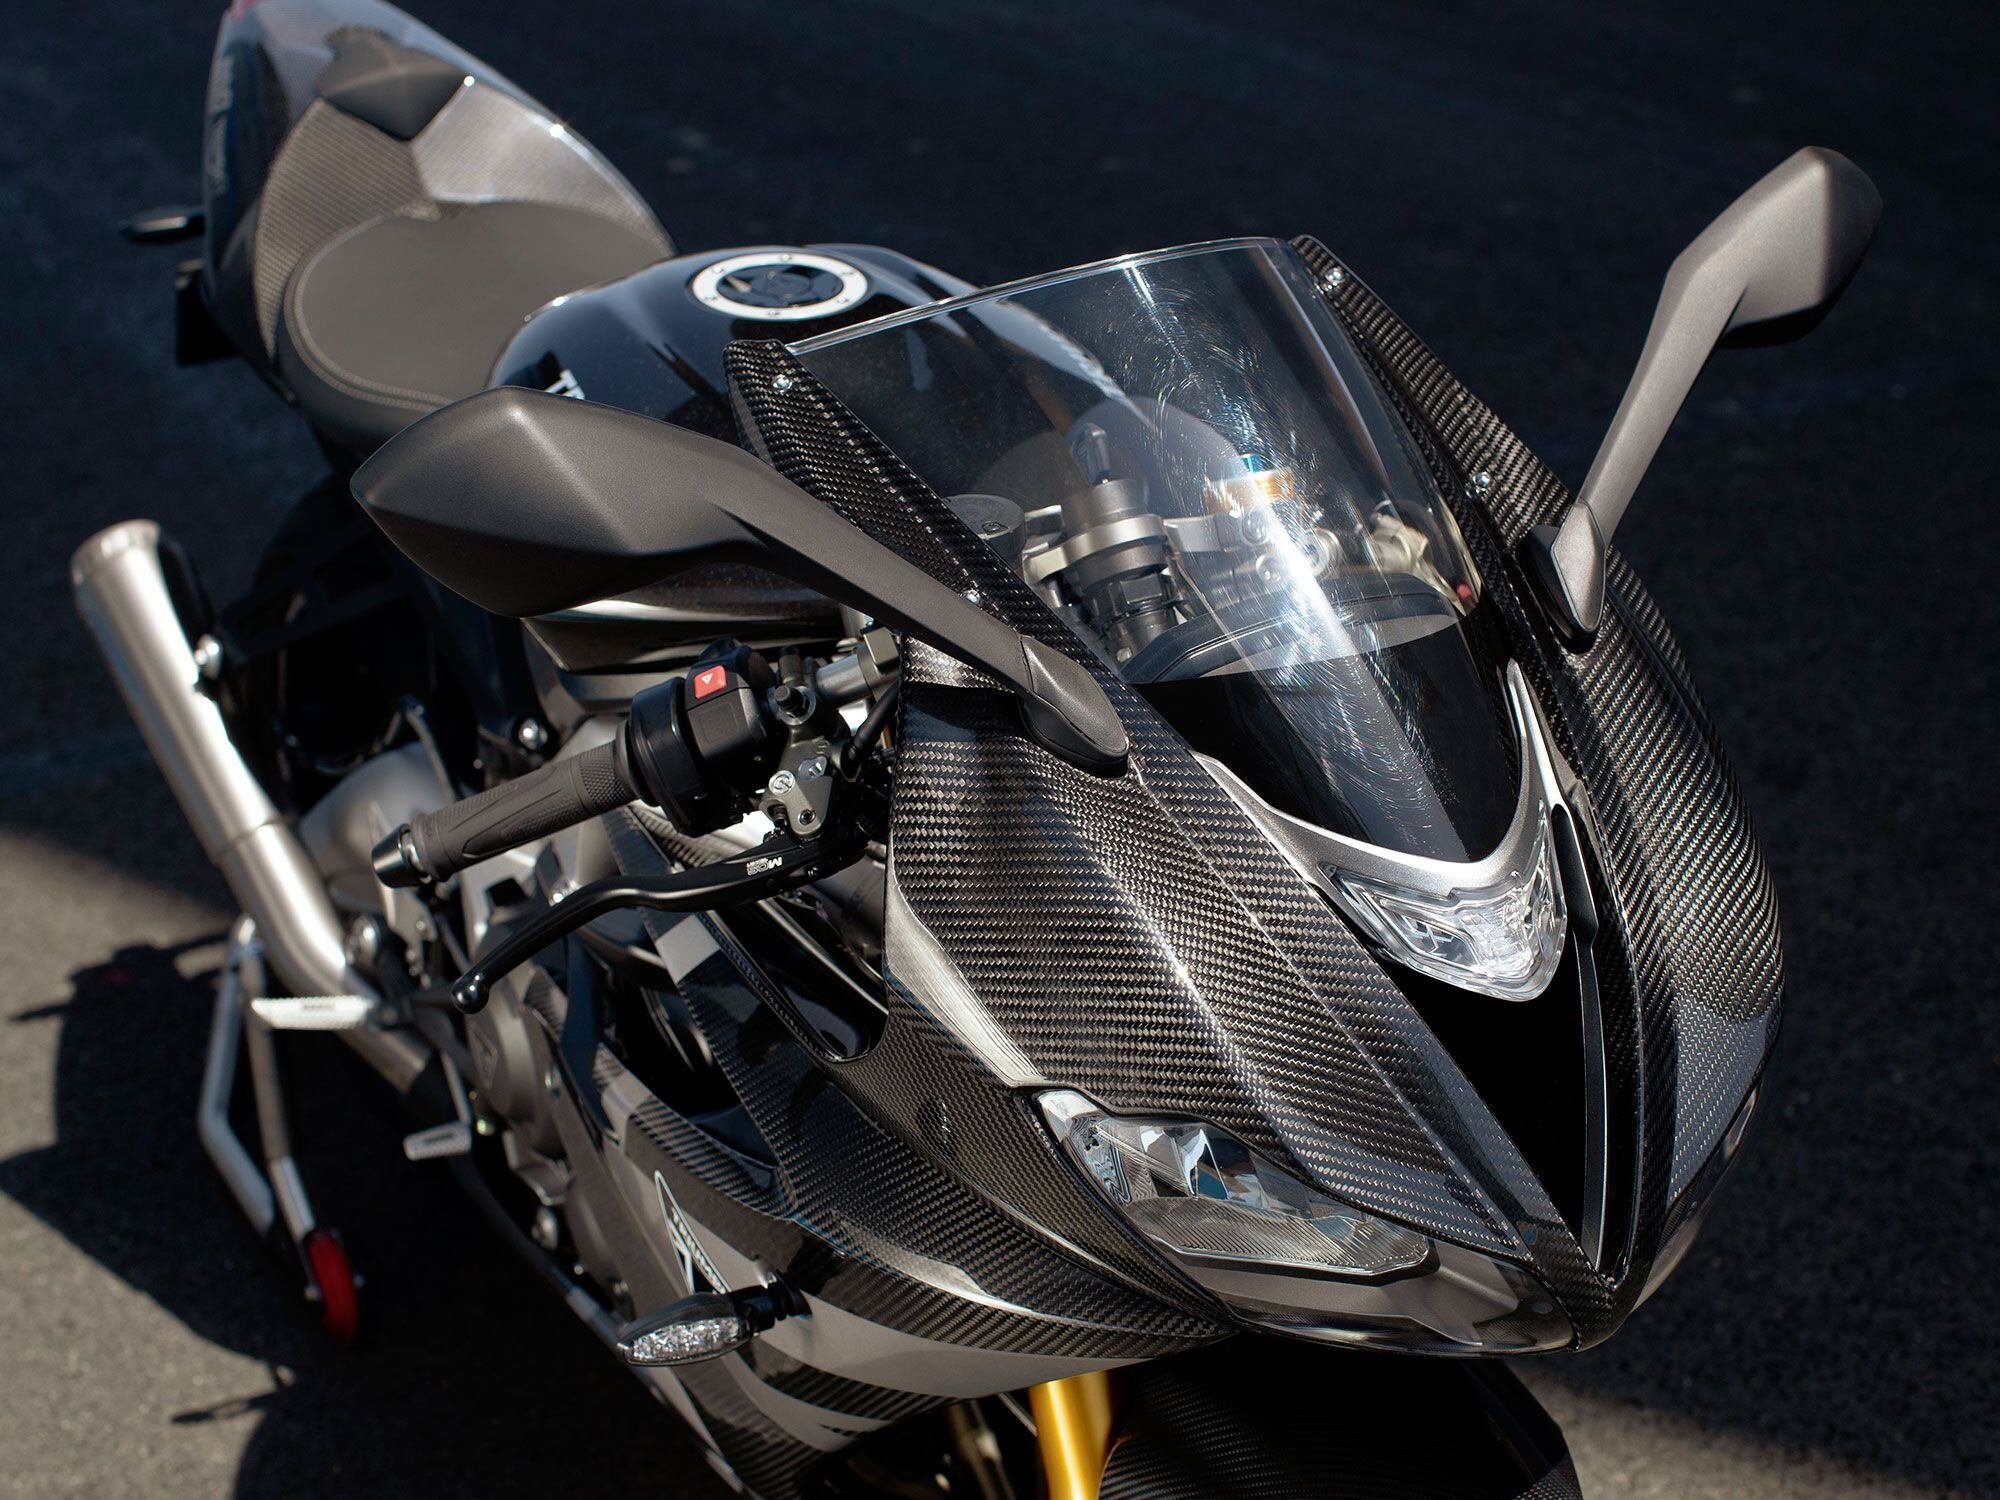 Saddle up aboard Triumph’s Daytona 765 Moto2 replica in this review.